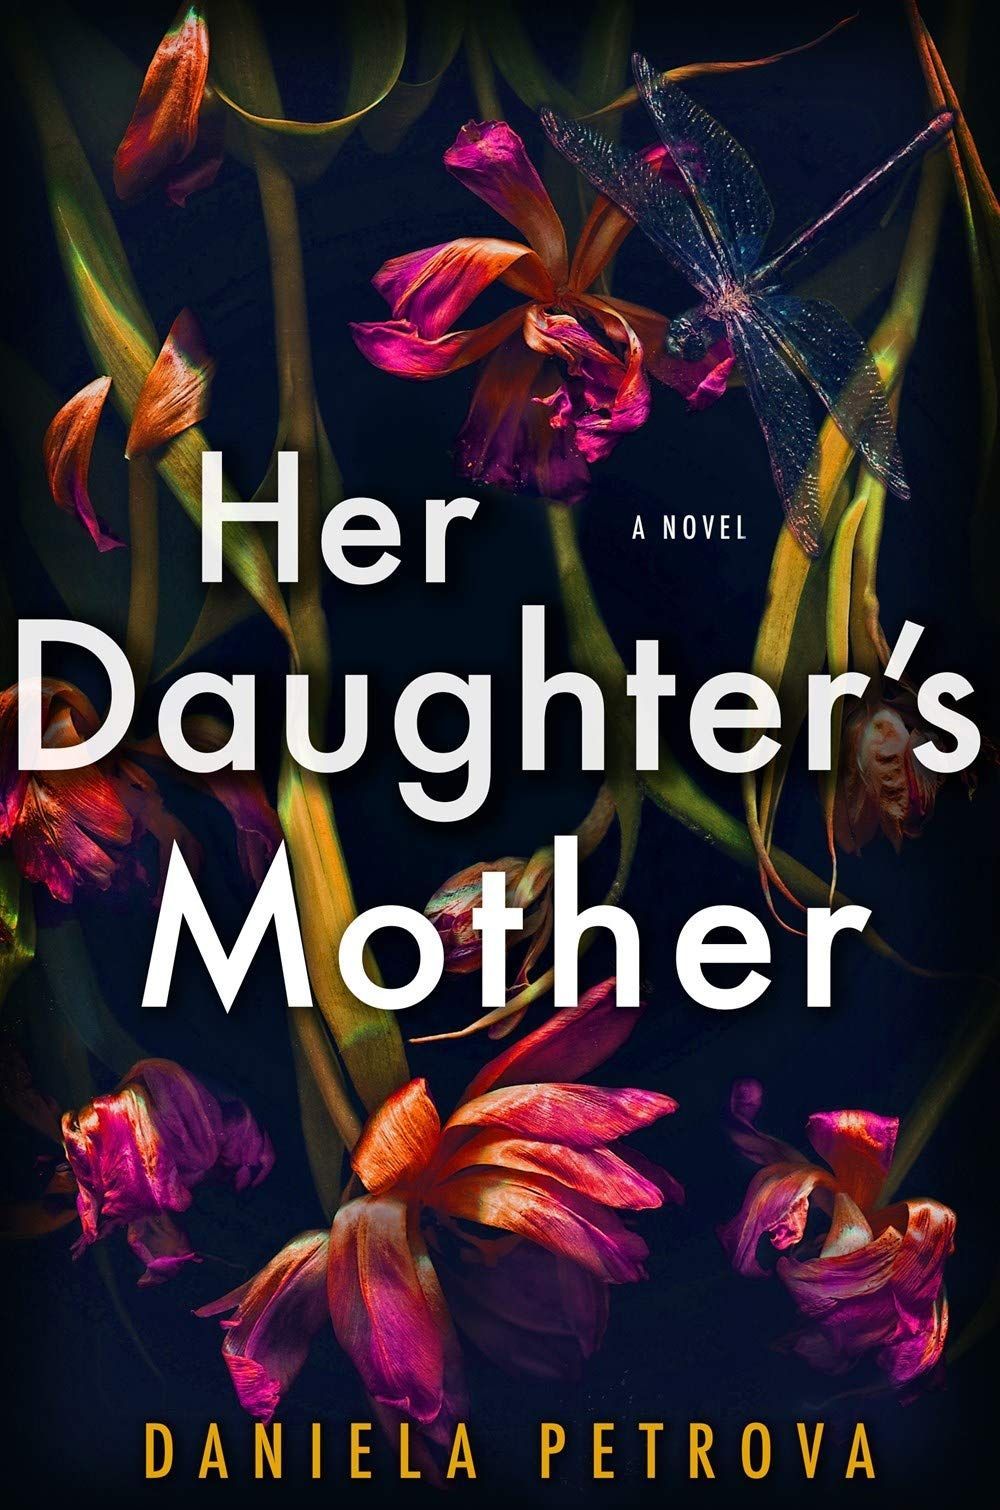 An Ethical Matryoshka: On Daniela Petrova’s “Her Daughter’s Mother”